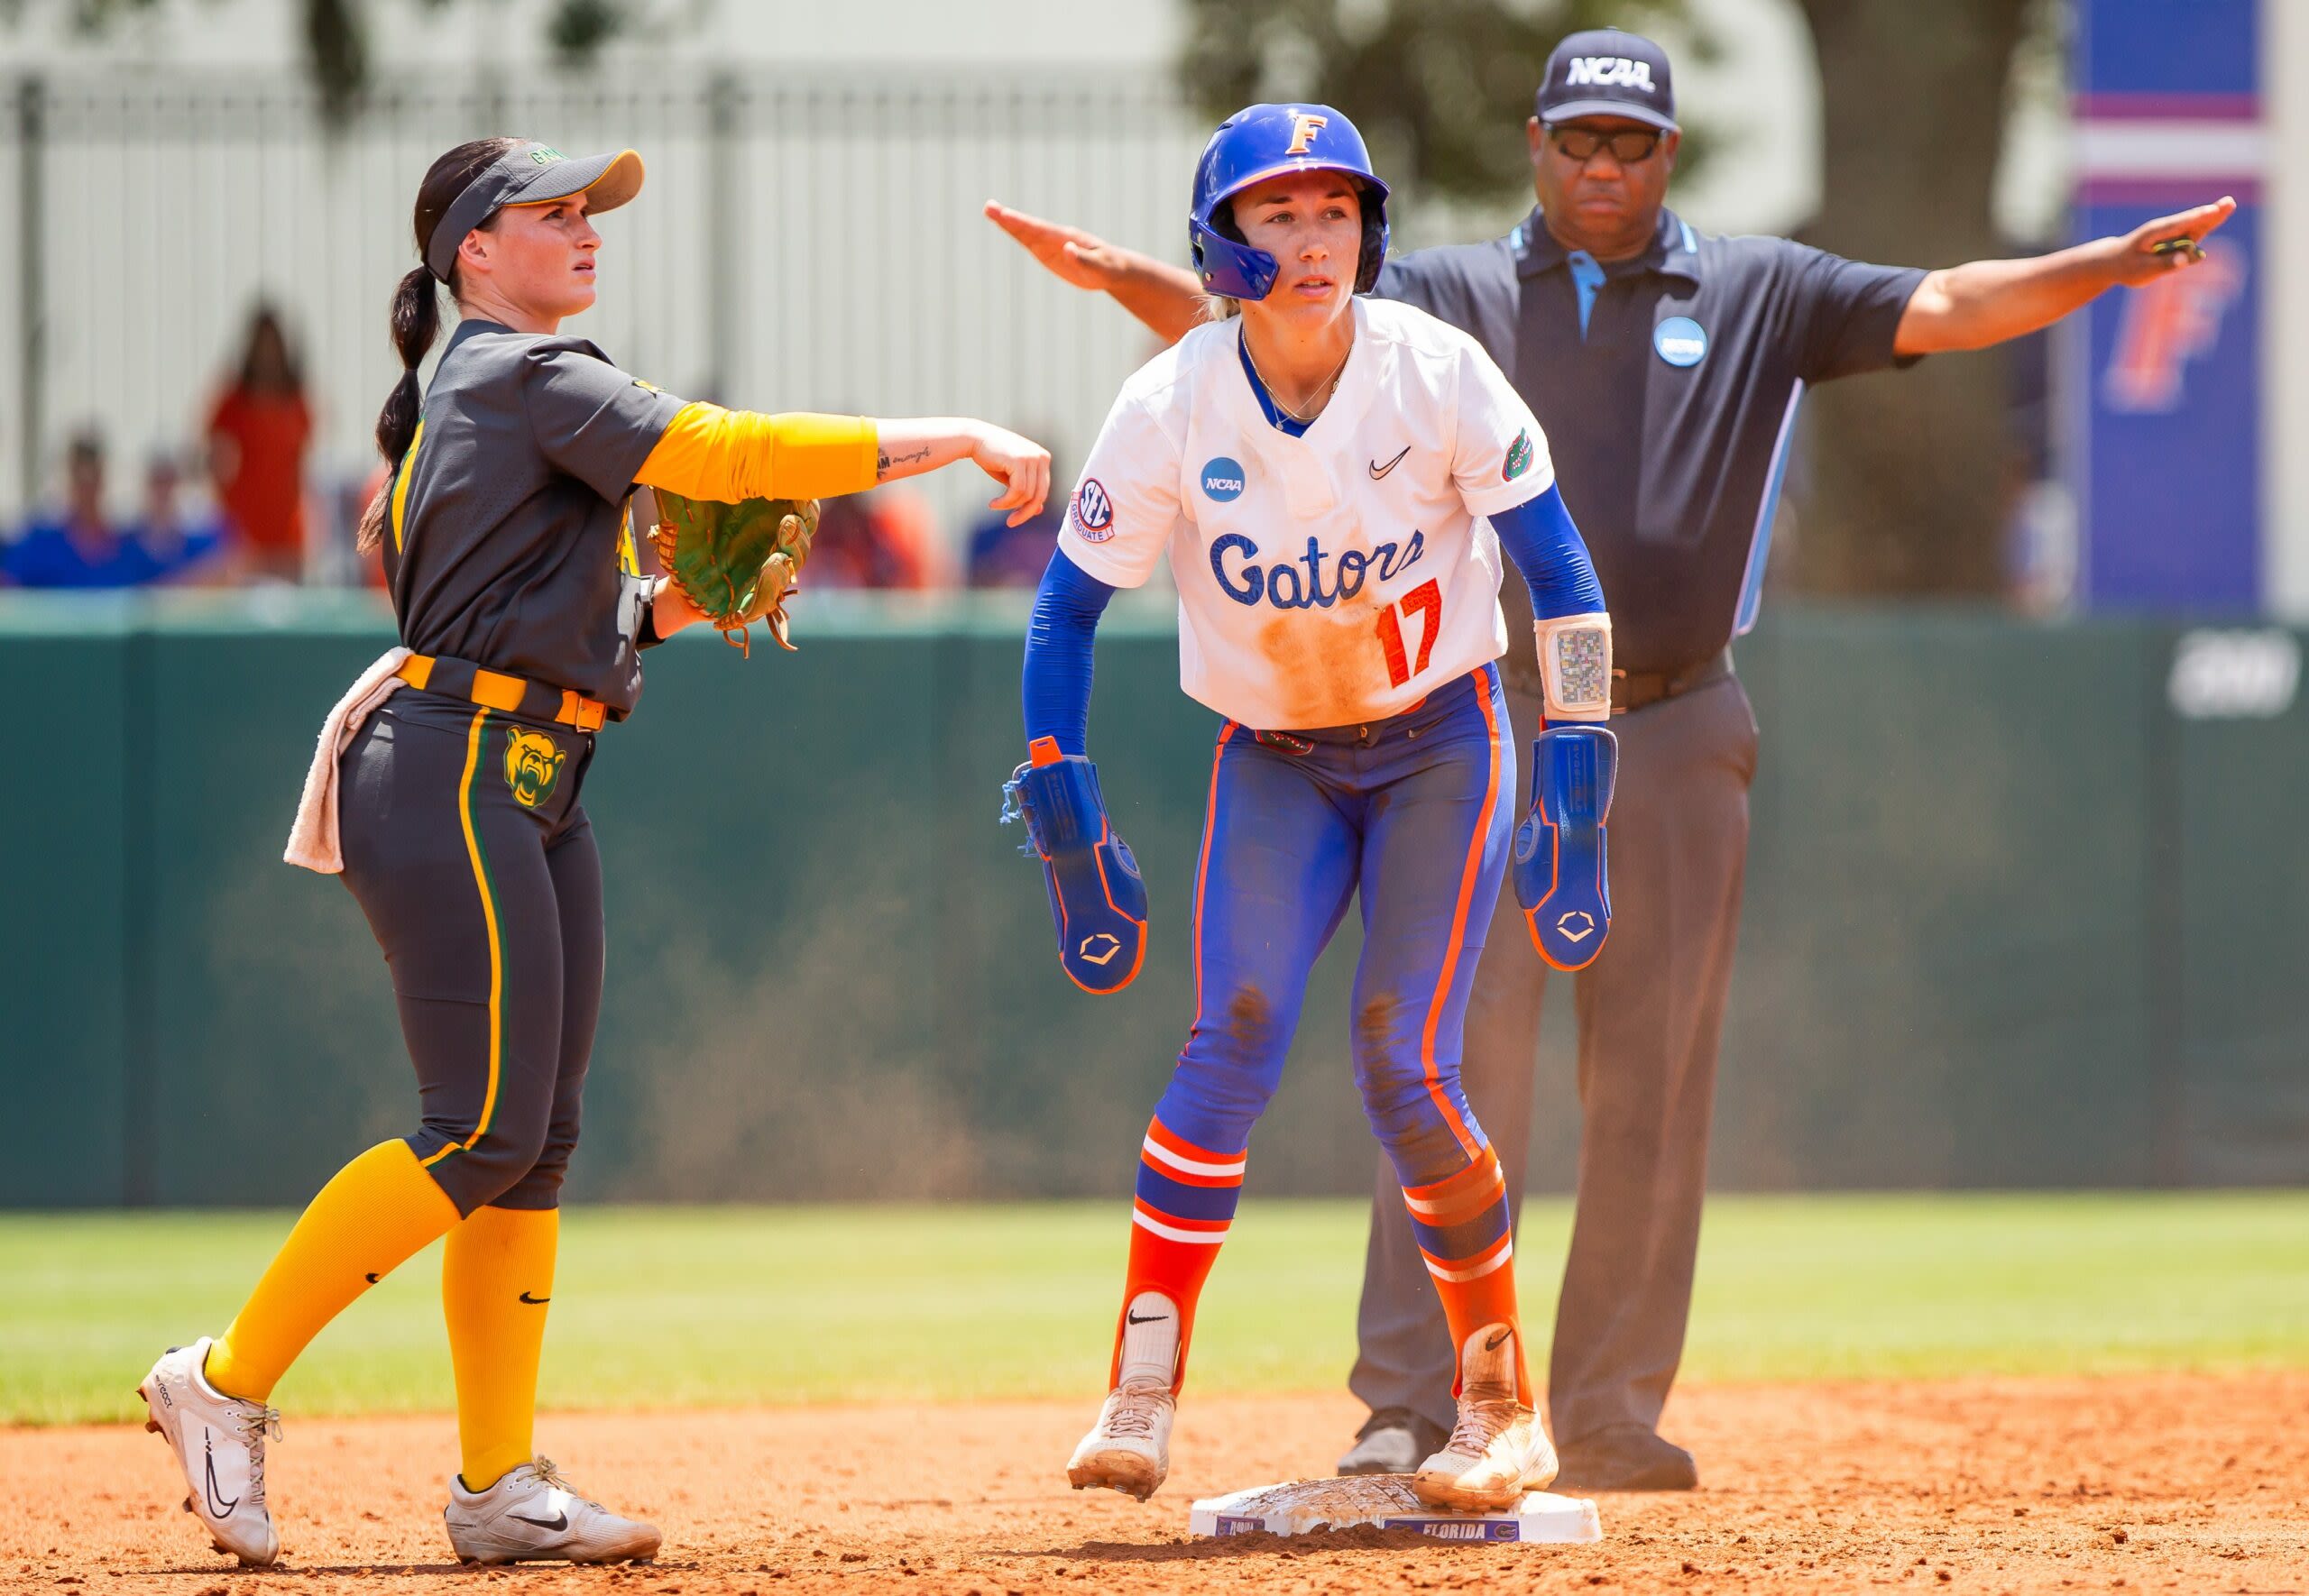 Florida drops Game 2 to Baylor, forces Super Regional rubber match